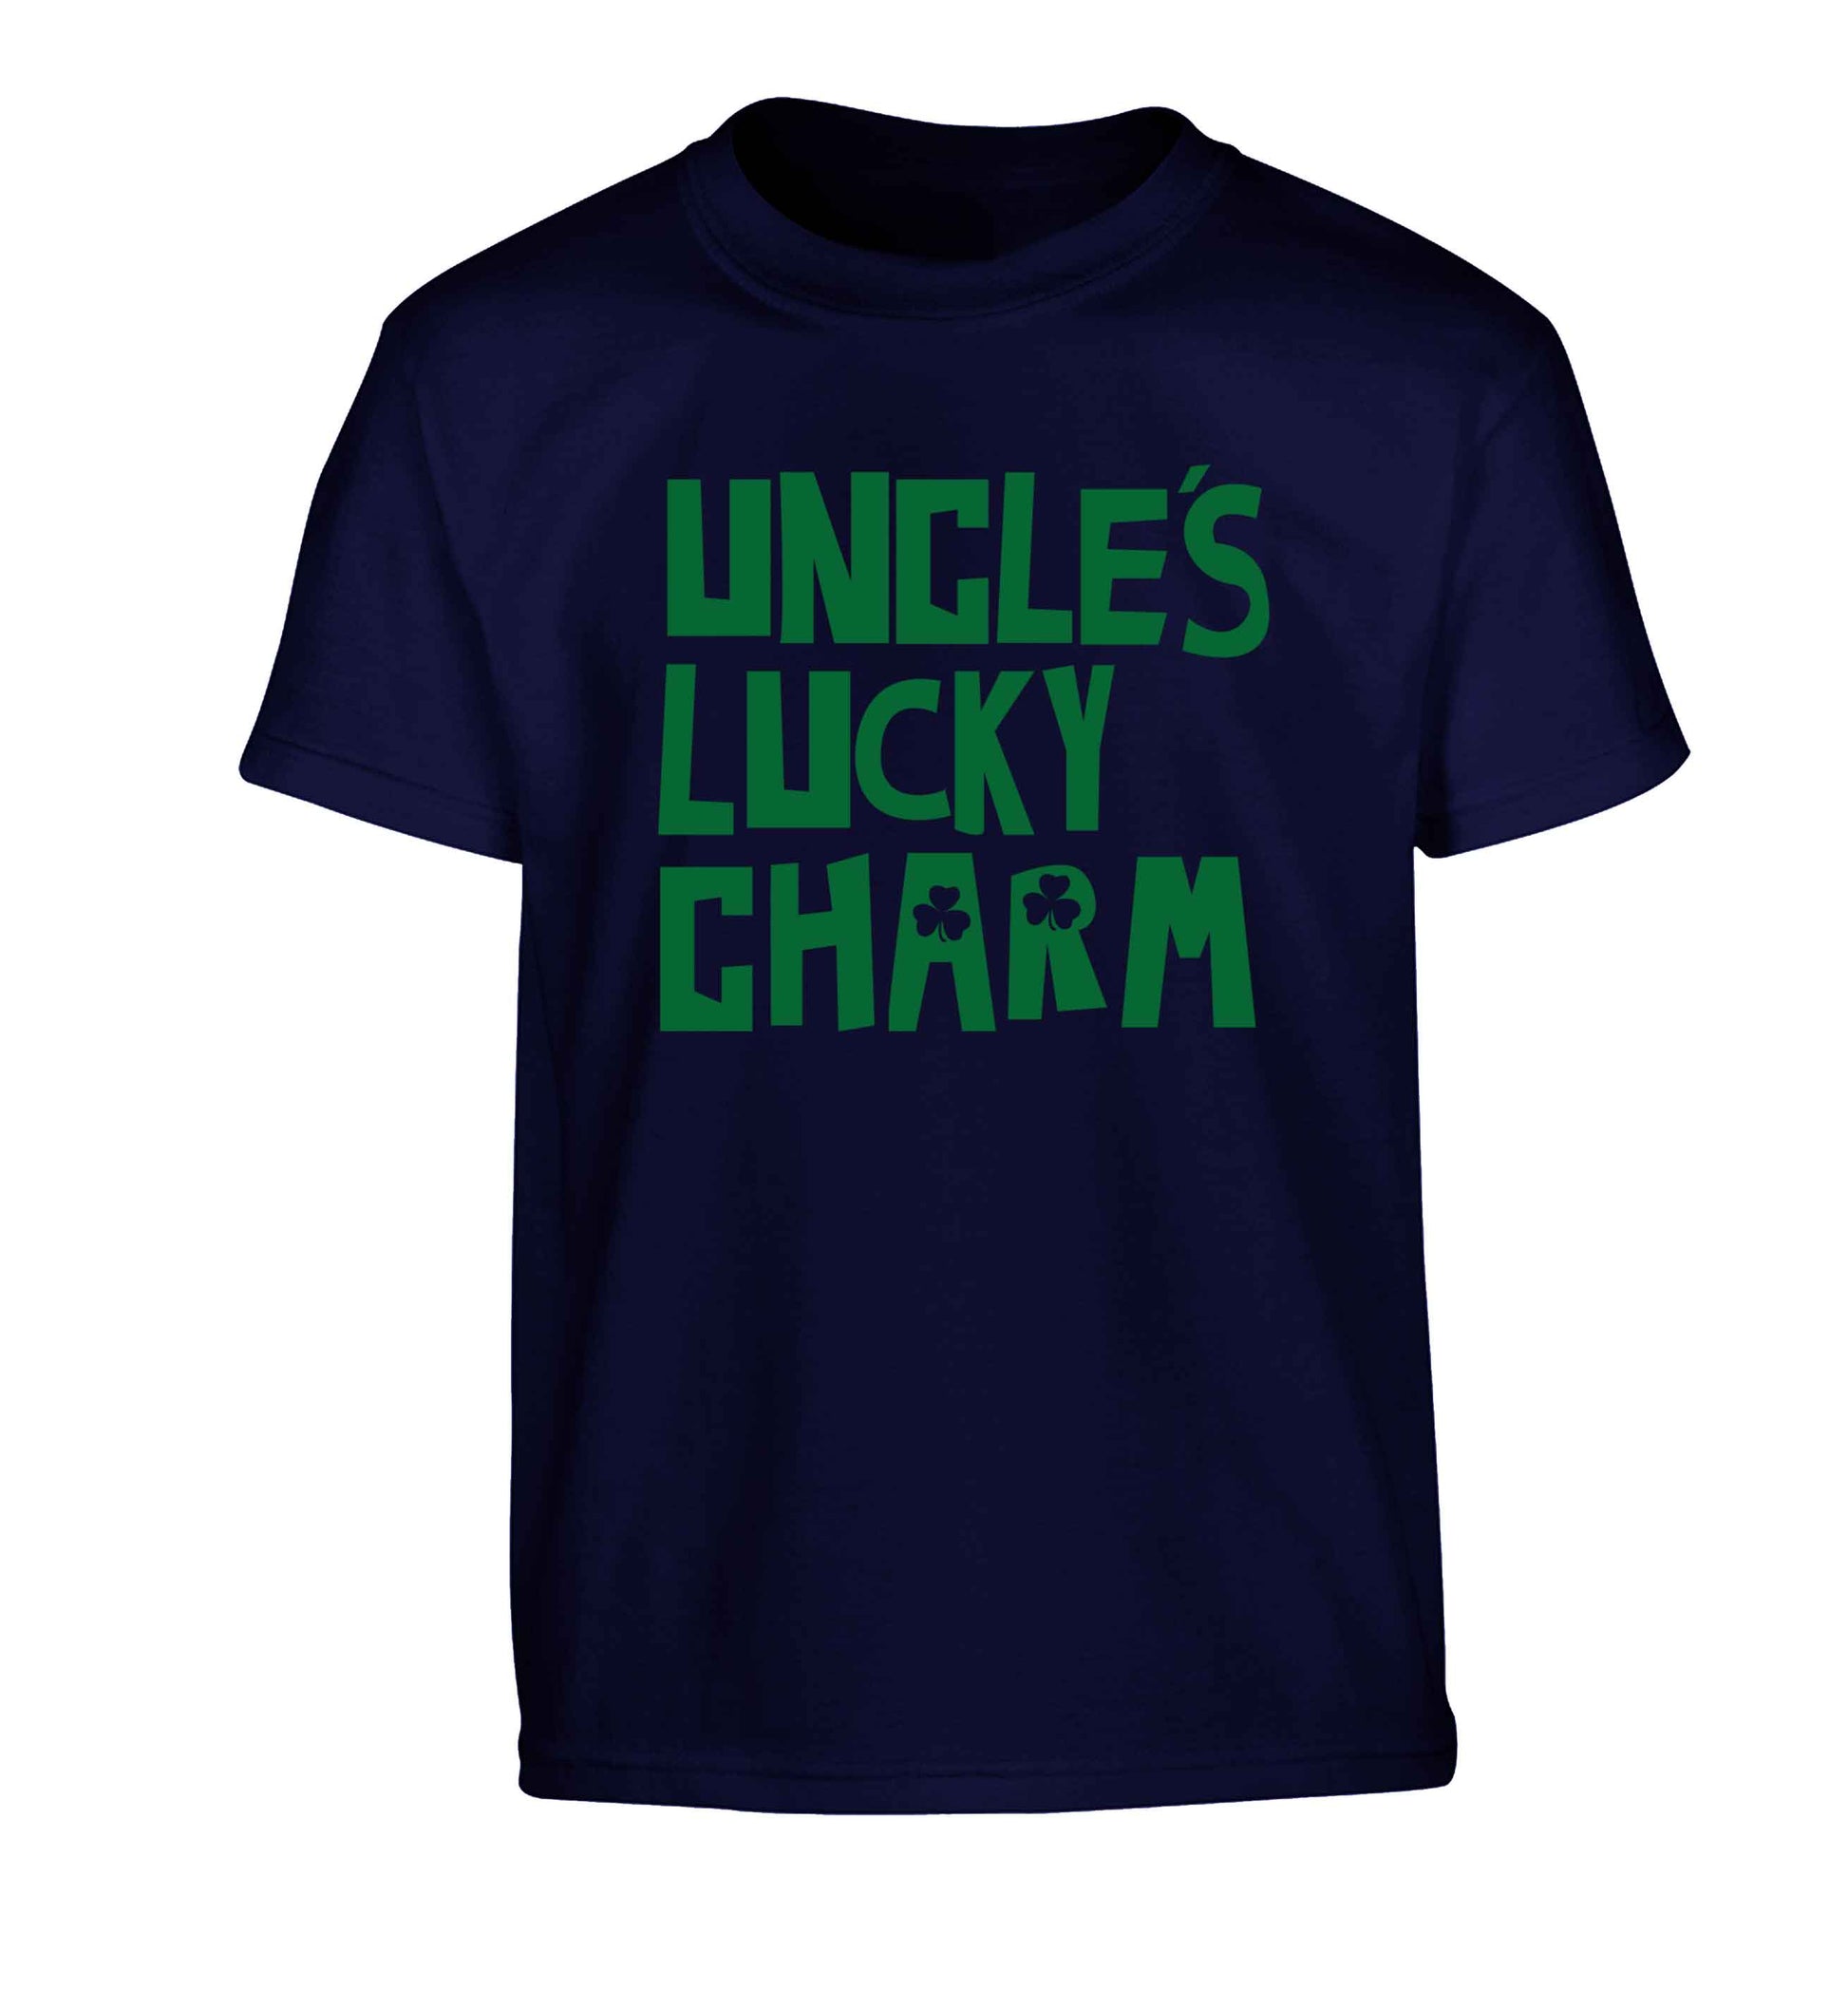 Uncles lucky charm Children's navy Tshirt 12-13 Years